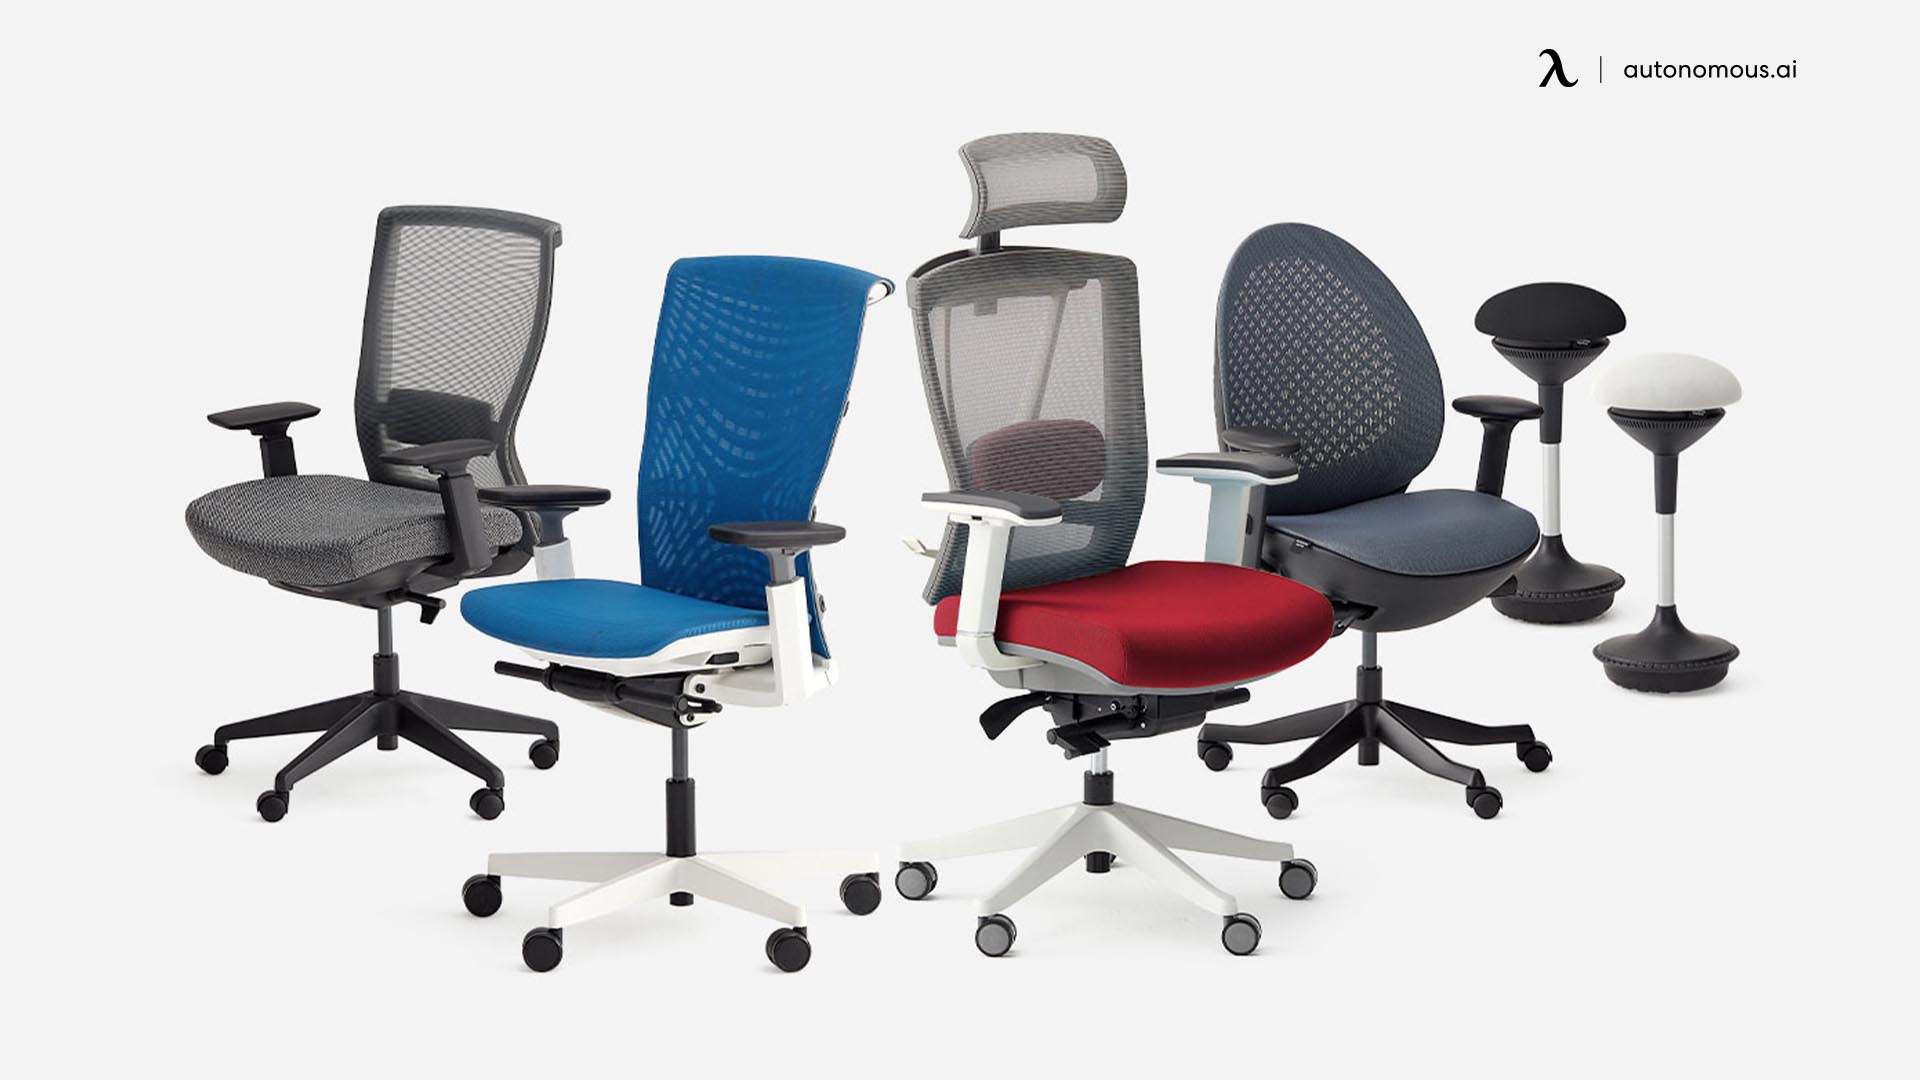 Selecting the Best Type of Chair for Your Needs